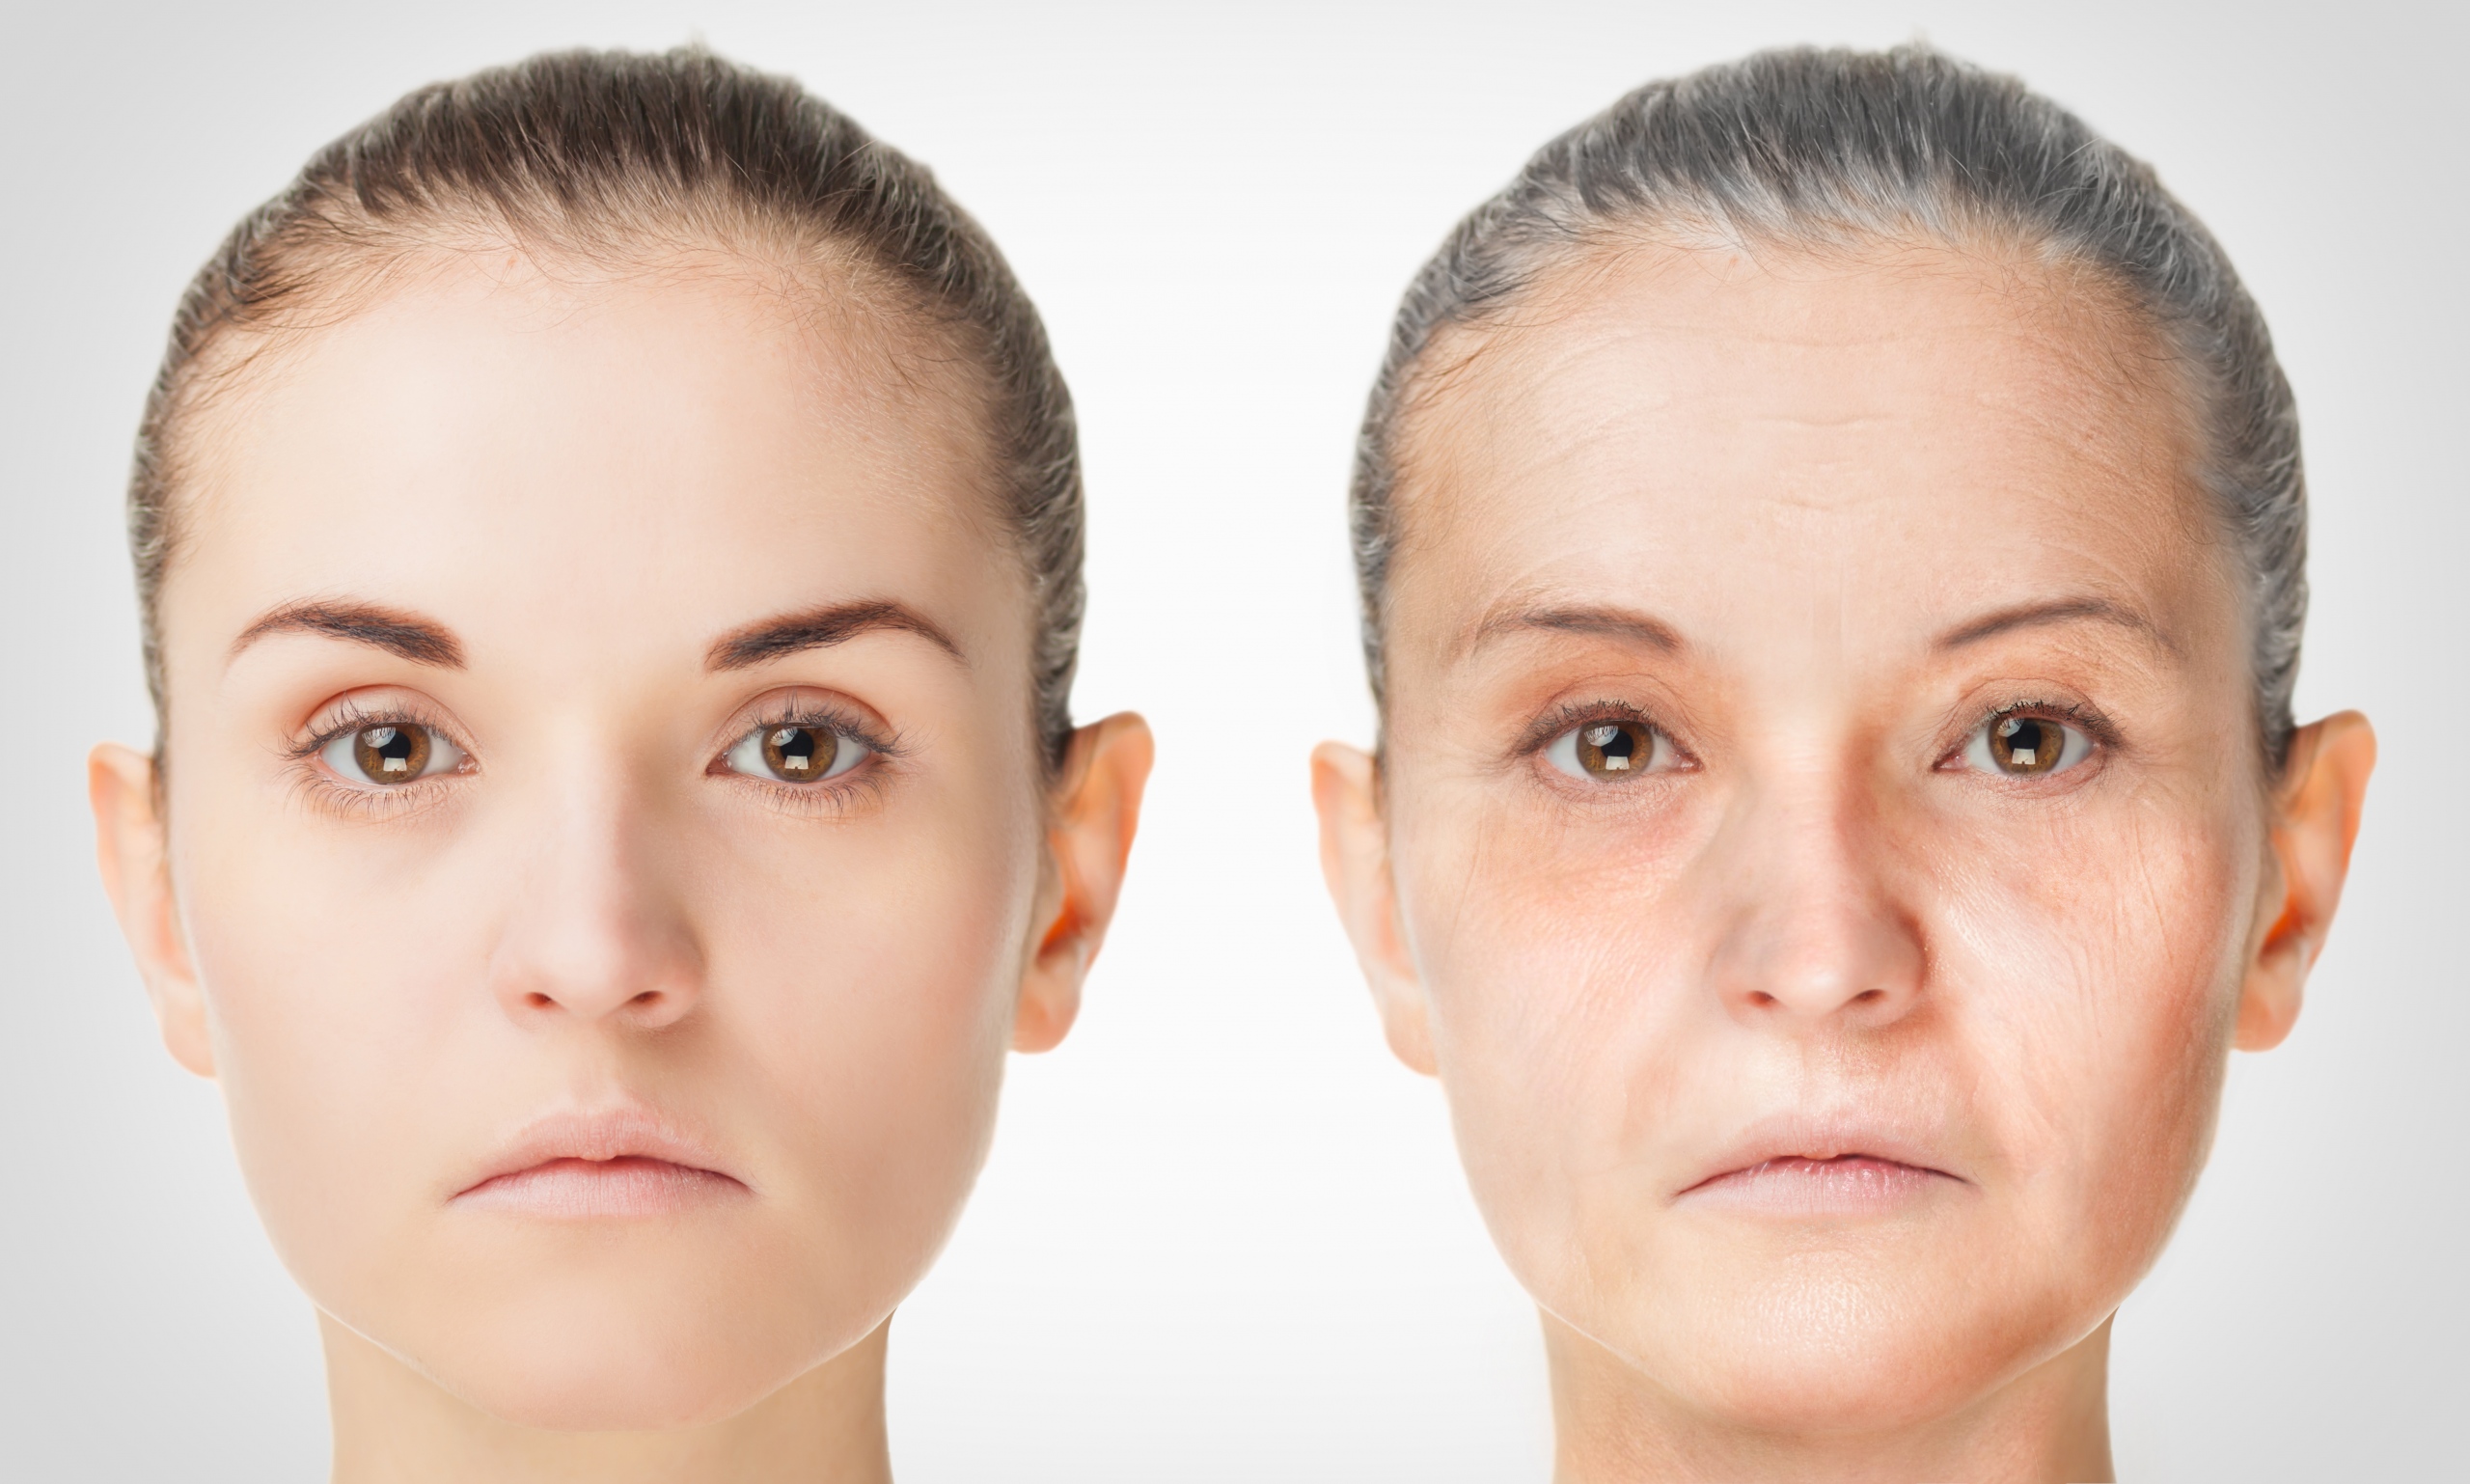 Anti Aging Creams - What To Consider Before You Purchase?